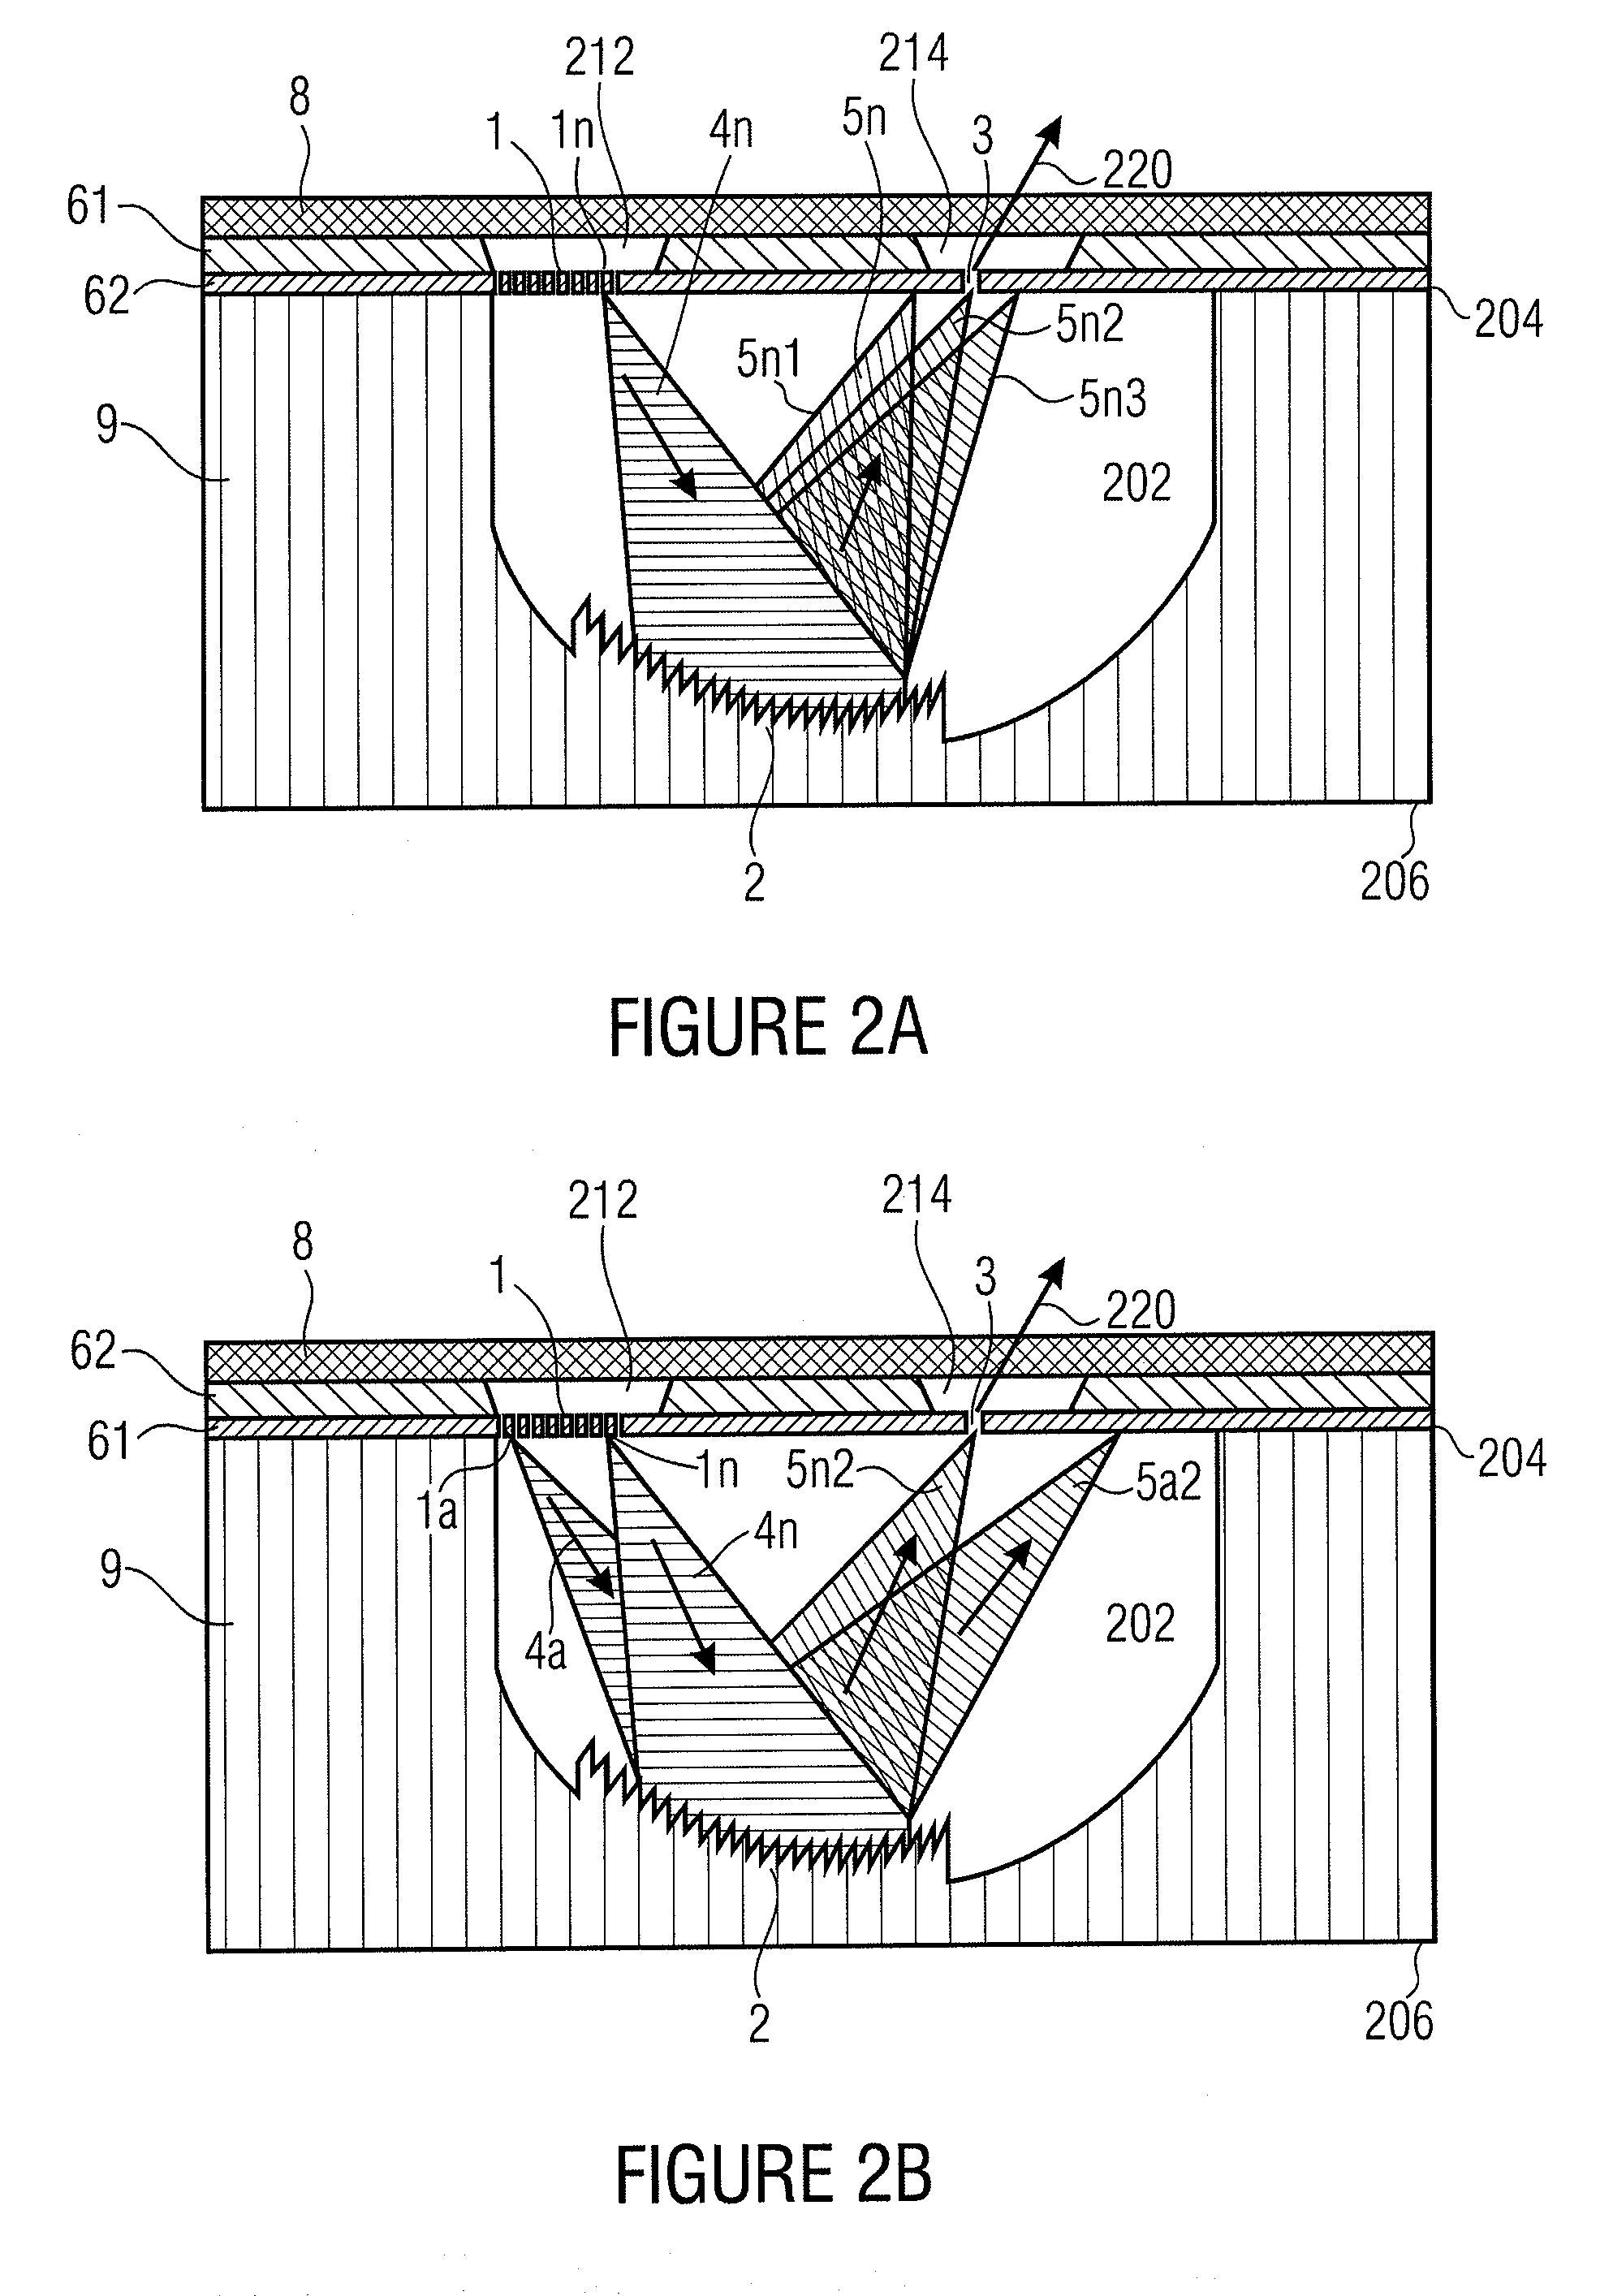 Radiation Generation Device for Generating Electromagnetic Radiation Having an Adjustable Spectral Composition, and Method of Producing Same